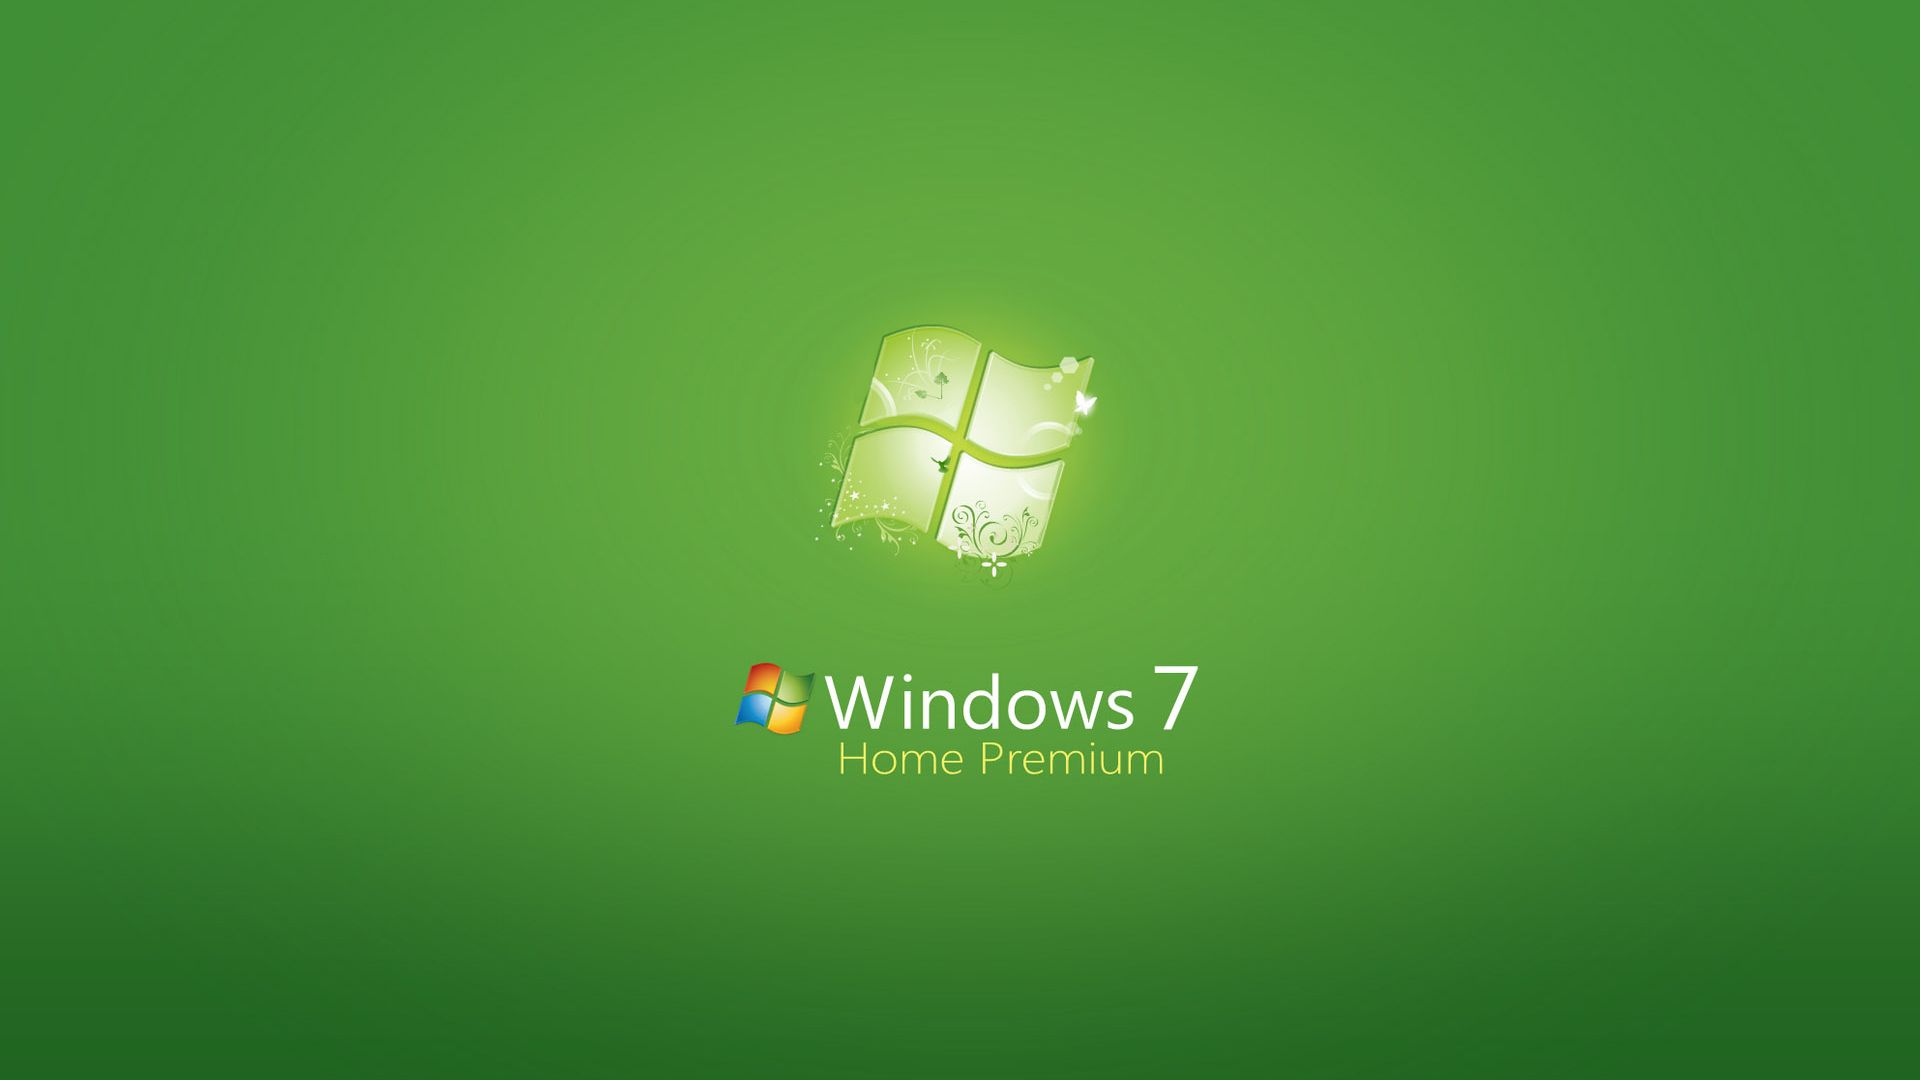 Windows 7 Home Premium Wallpapers Group 63